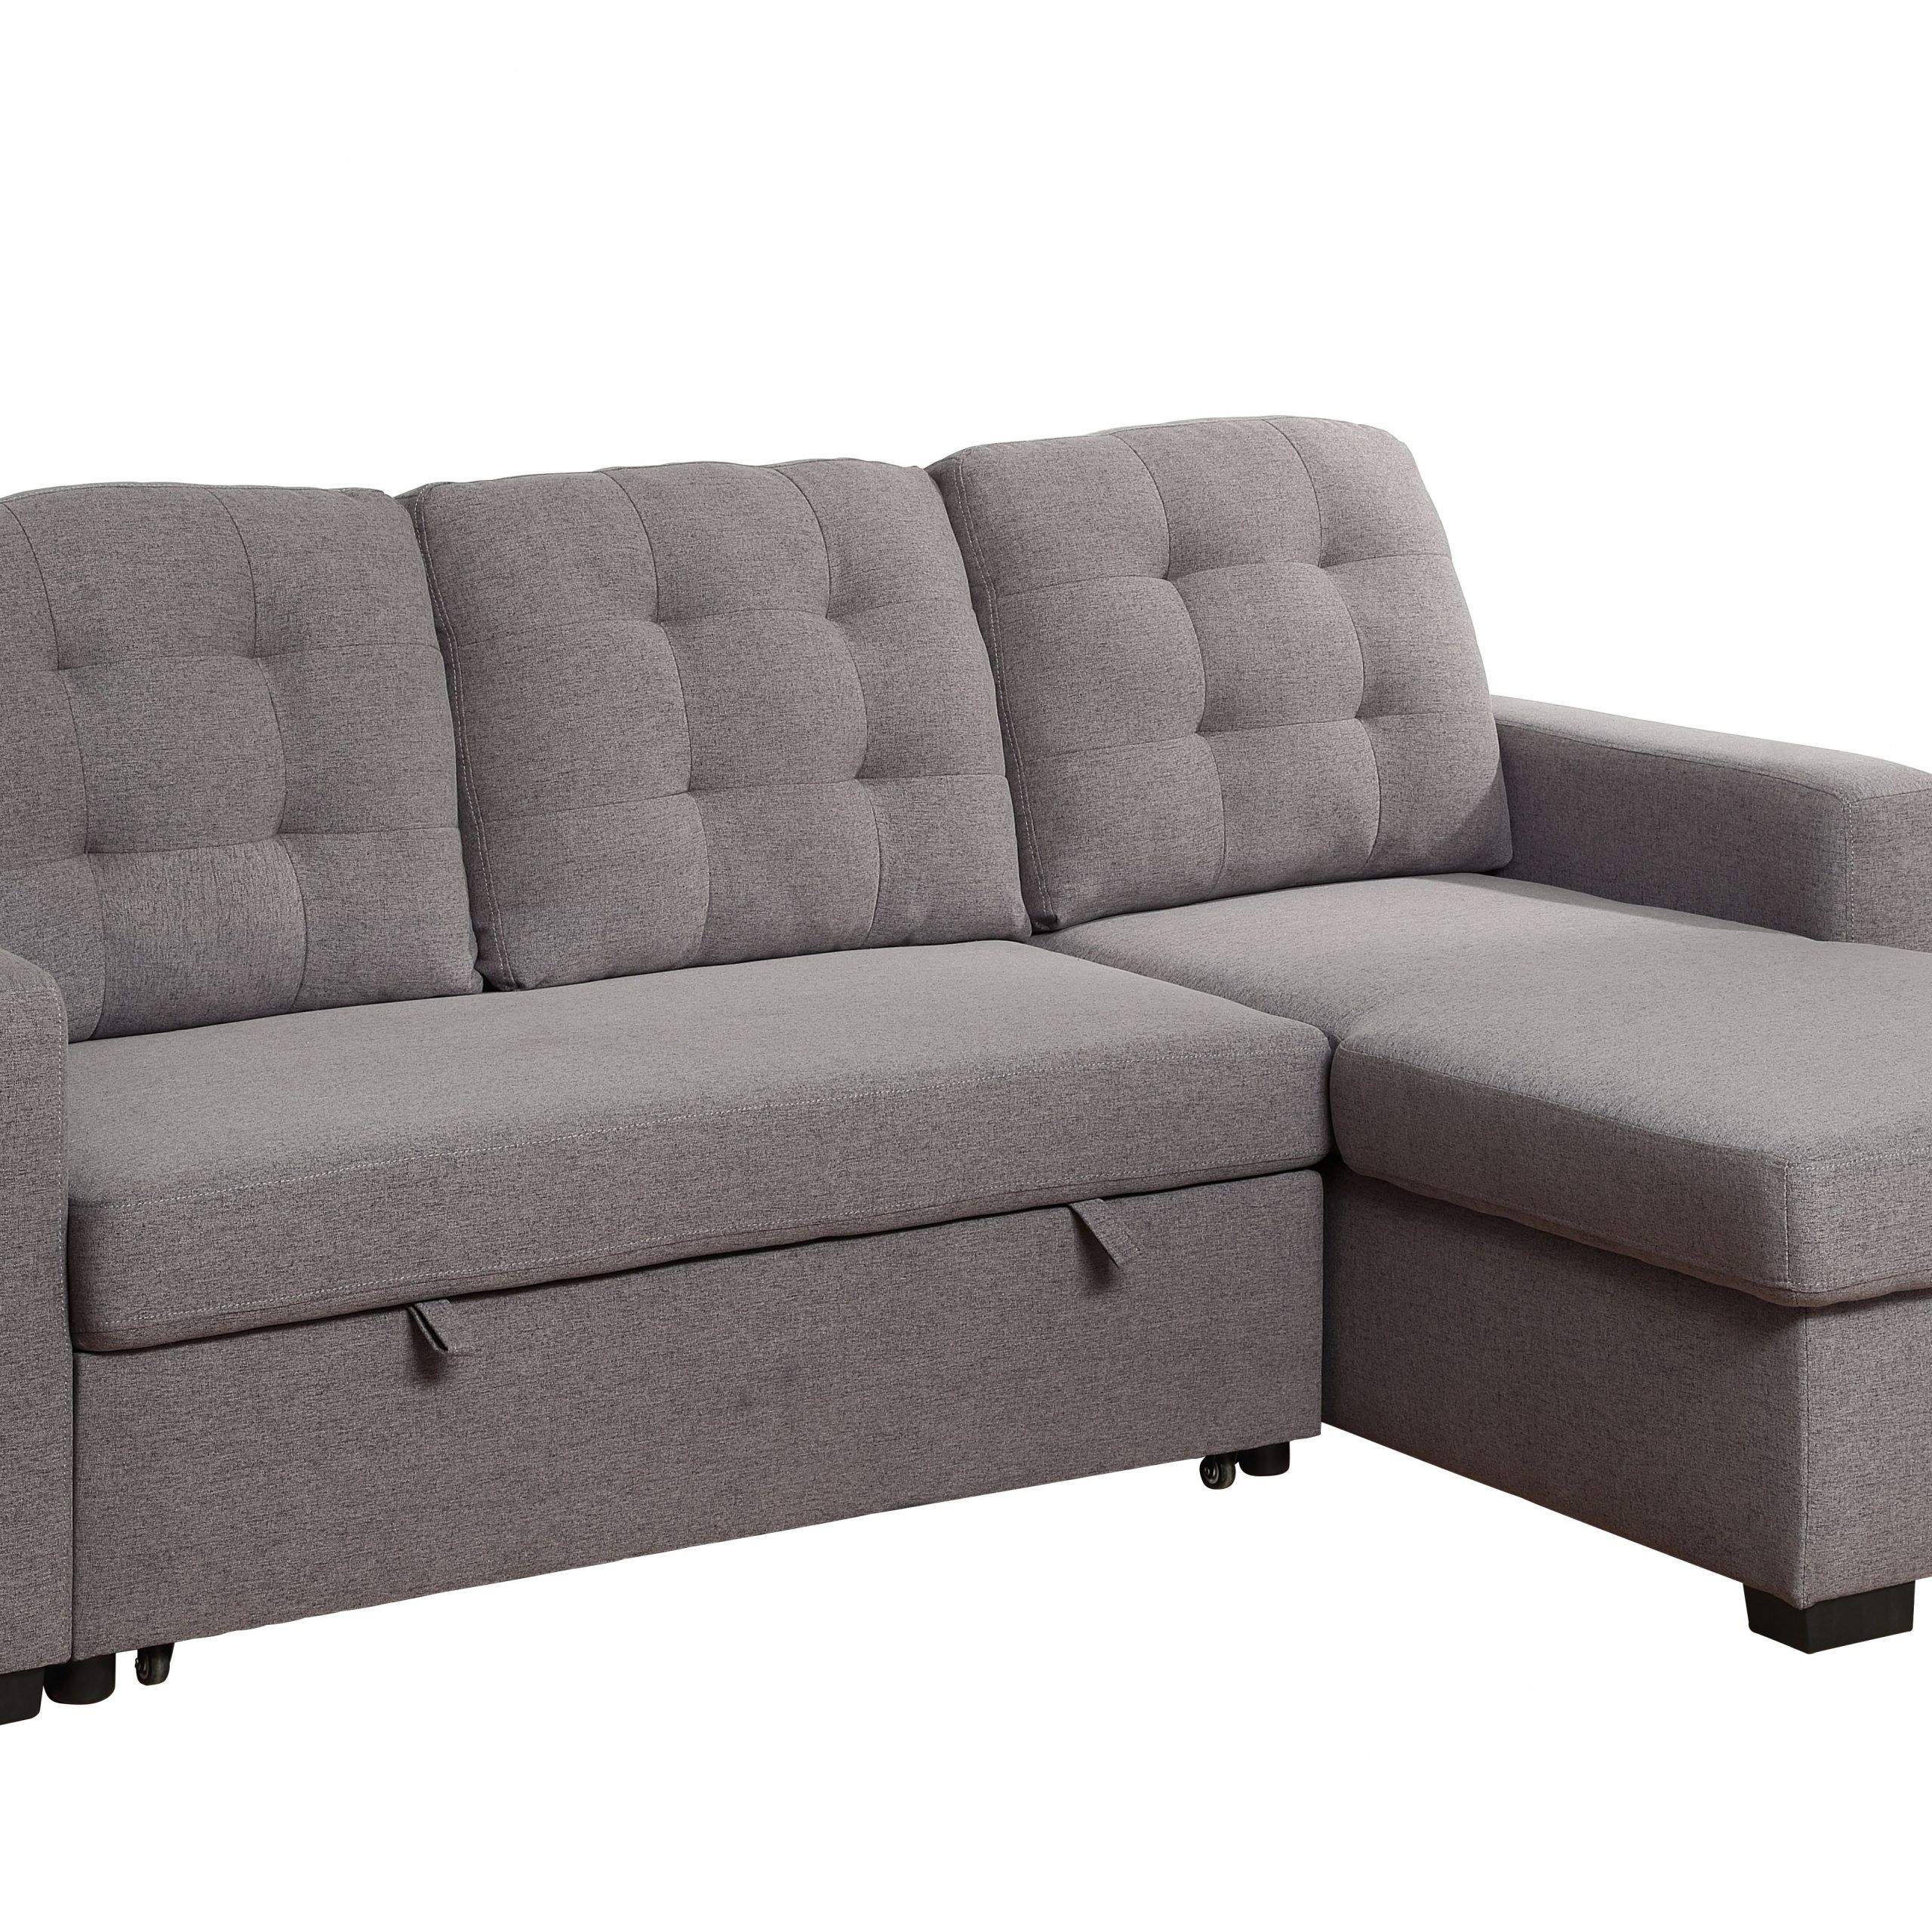 Chambord Reversible Storage Sleeper Sectional Sofa In Gray With Regard To Palisades Reversible Small Space Sectional Sofas With Storage (View 13 of 15)